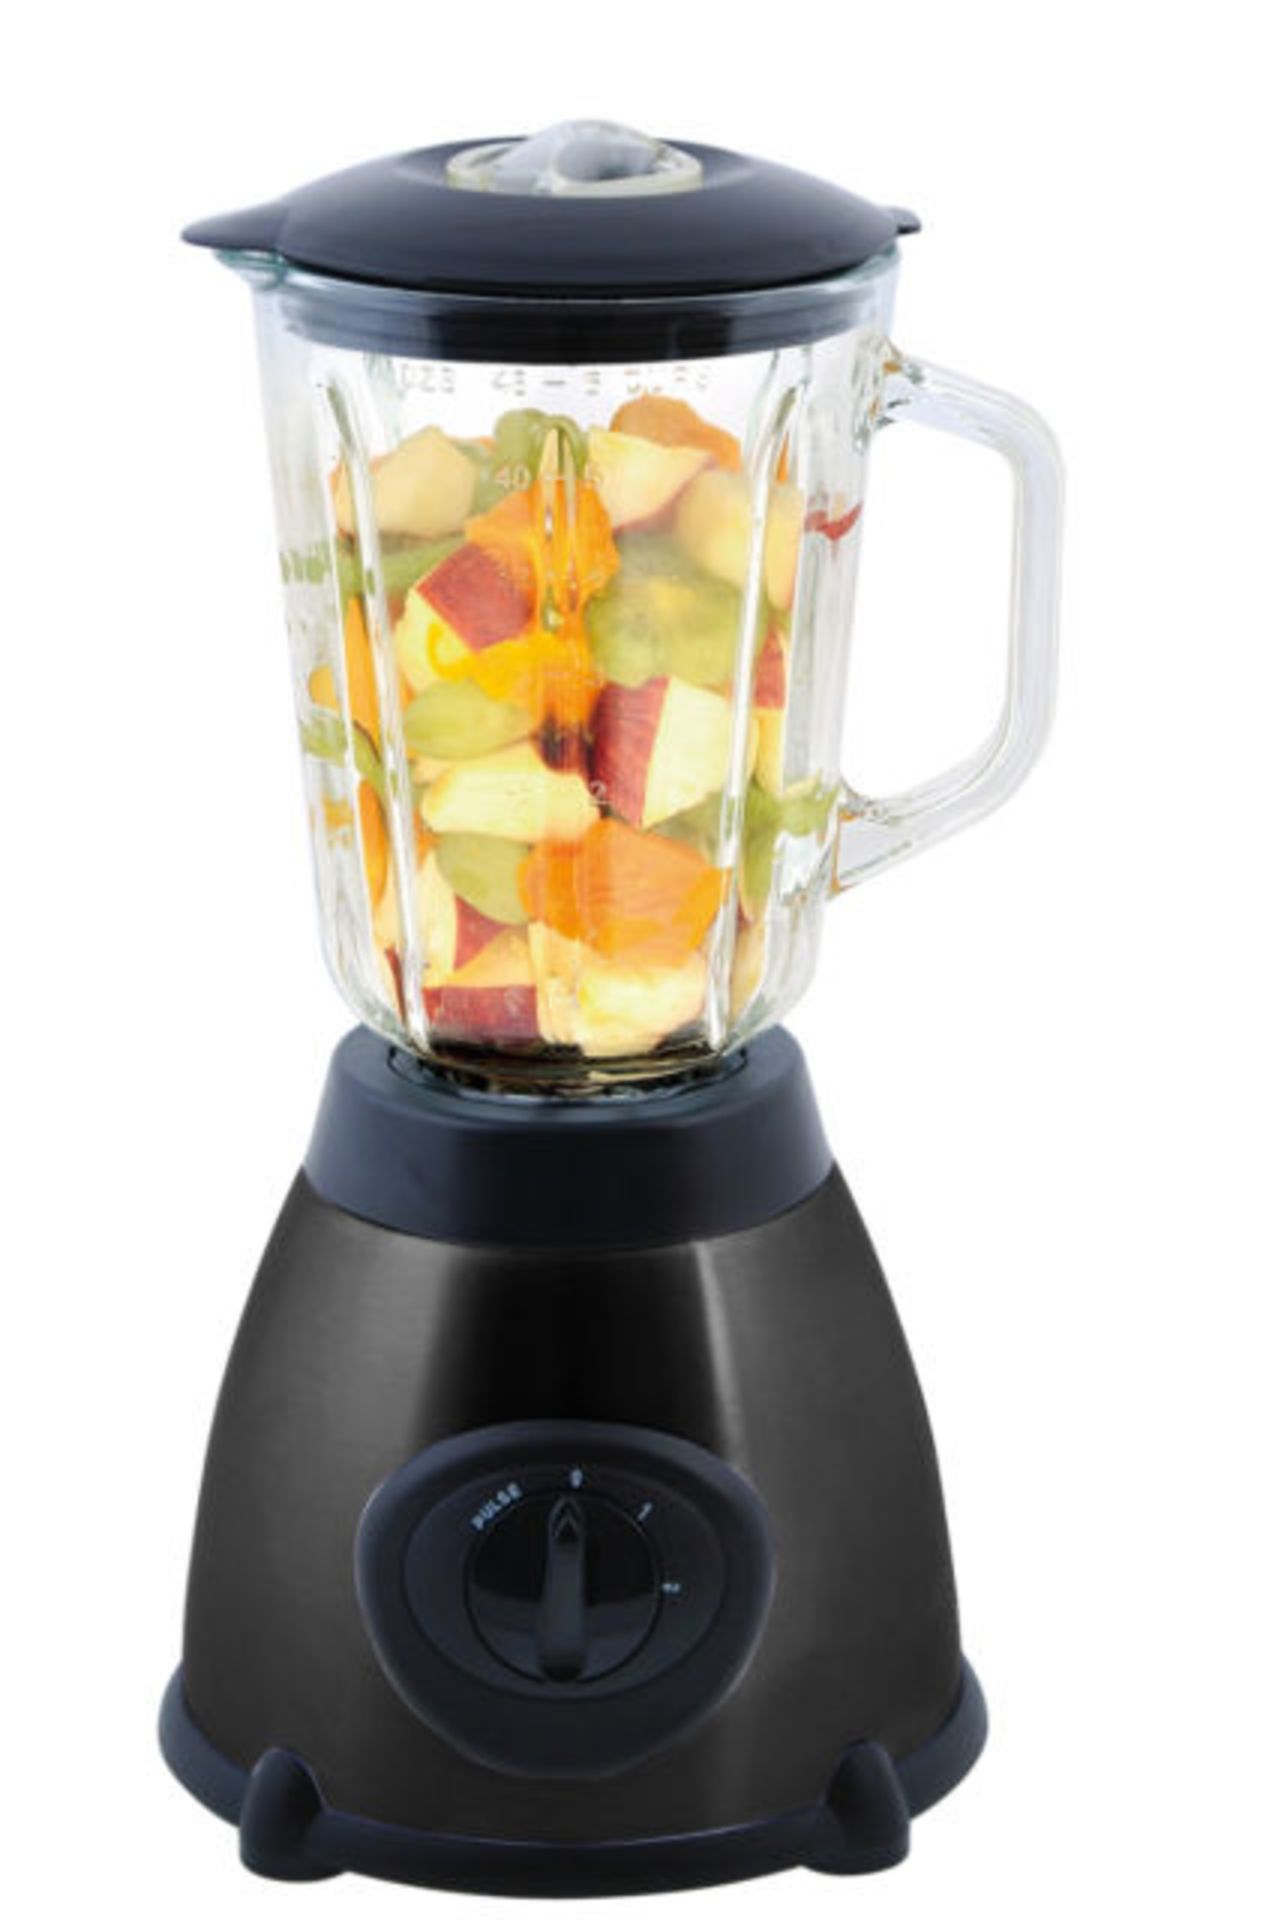 V Brand New Blender Mixer with Grinder and Grinding Cup - 1.5l Large Capacity - Ice Crusher Function